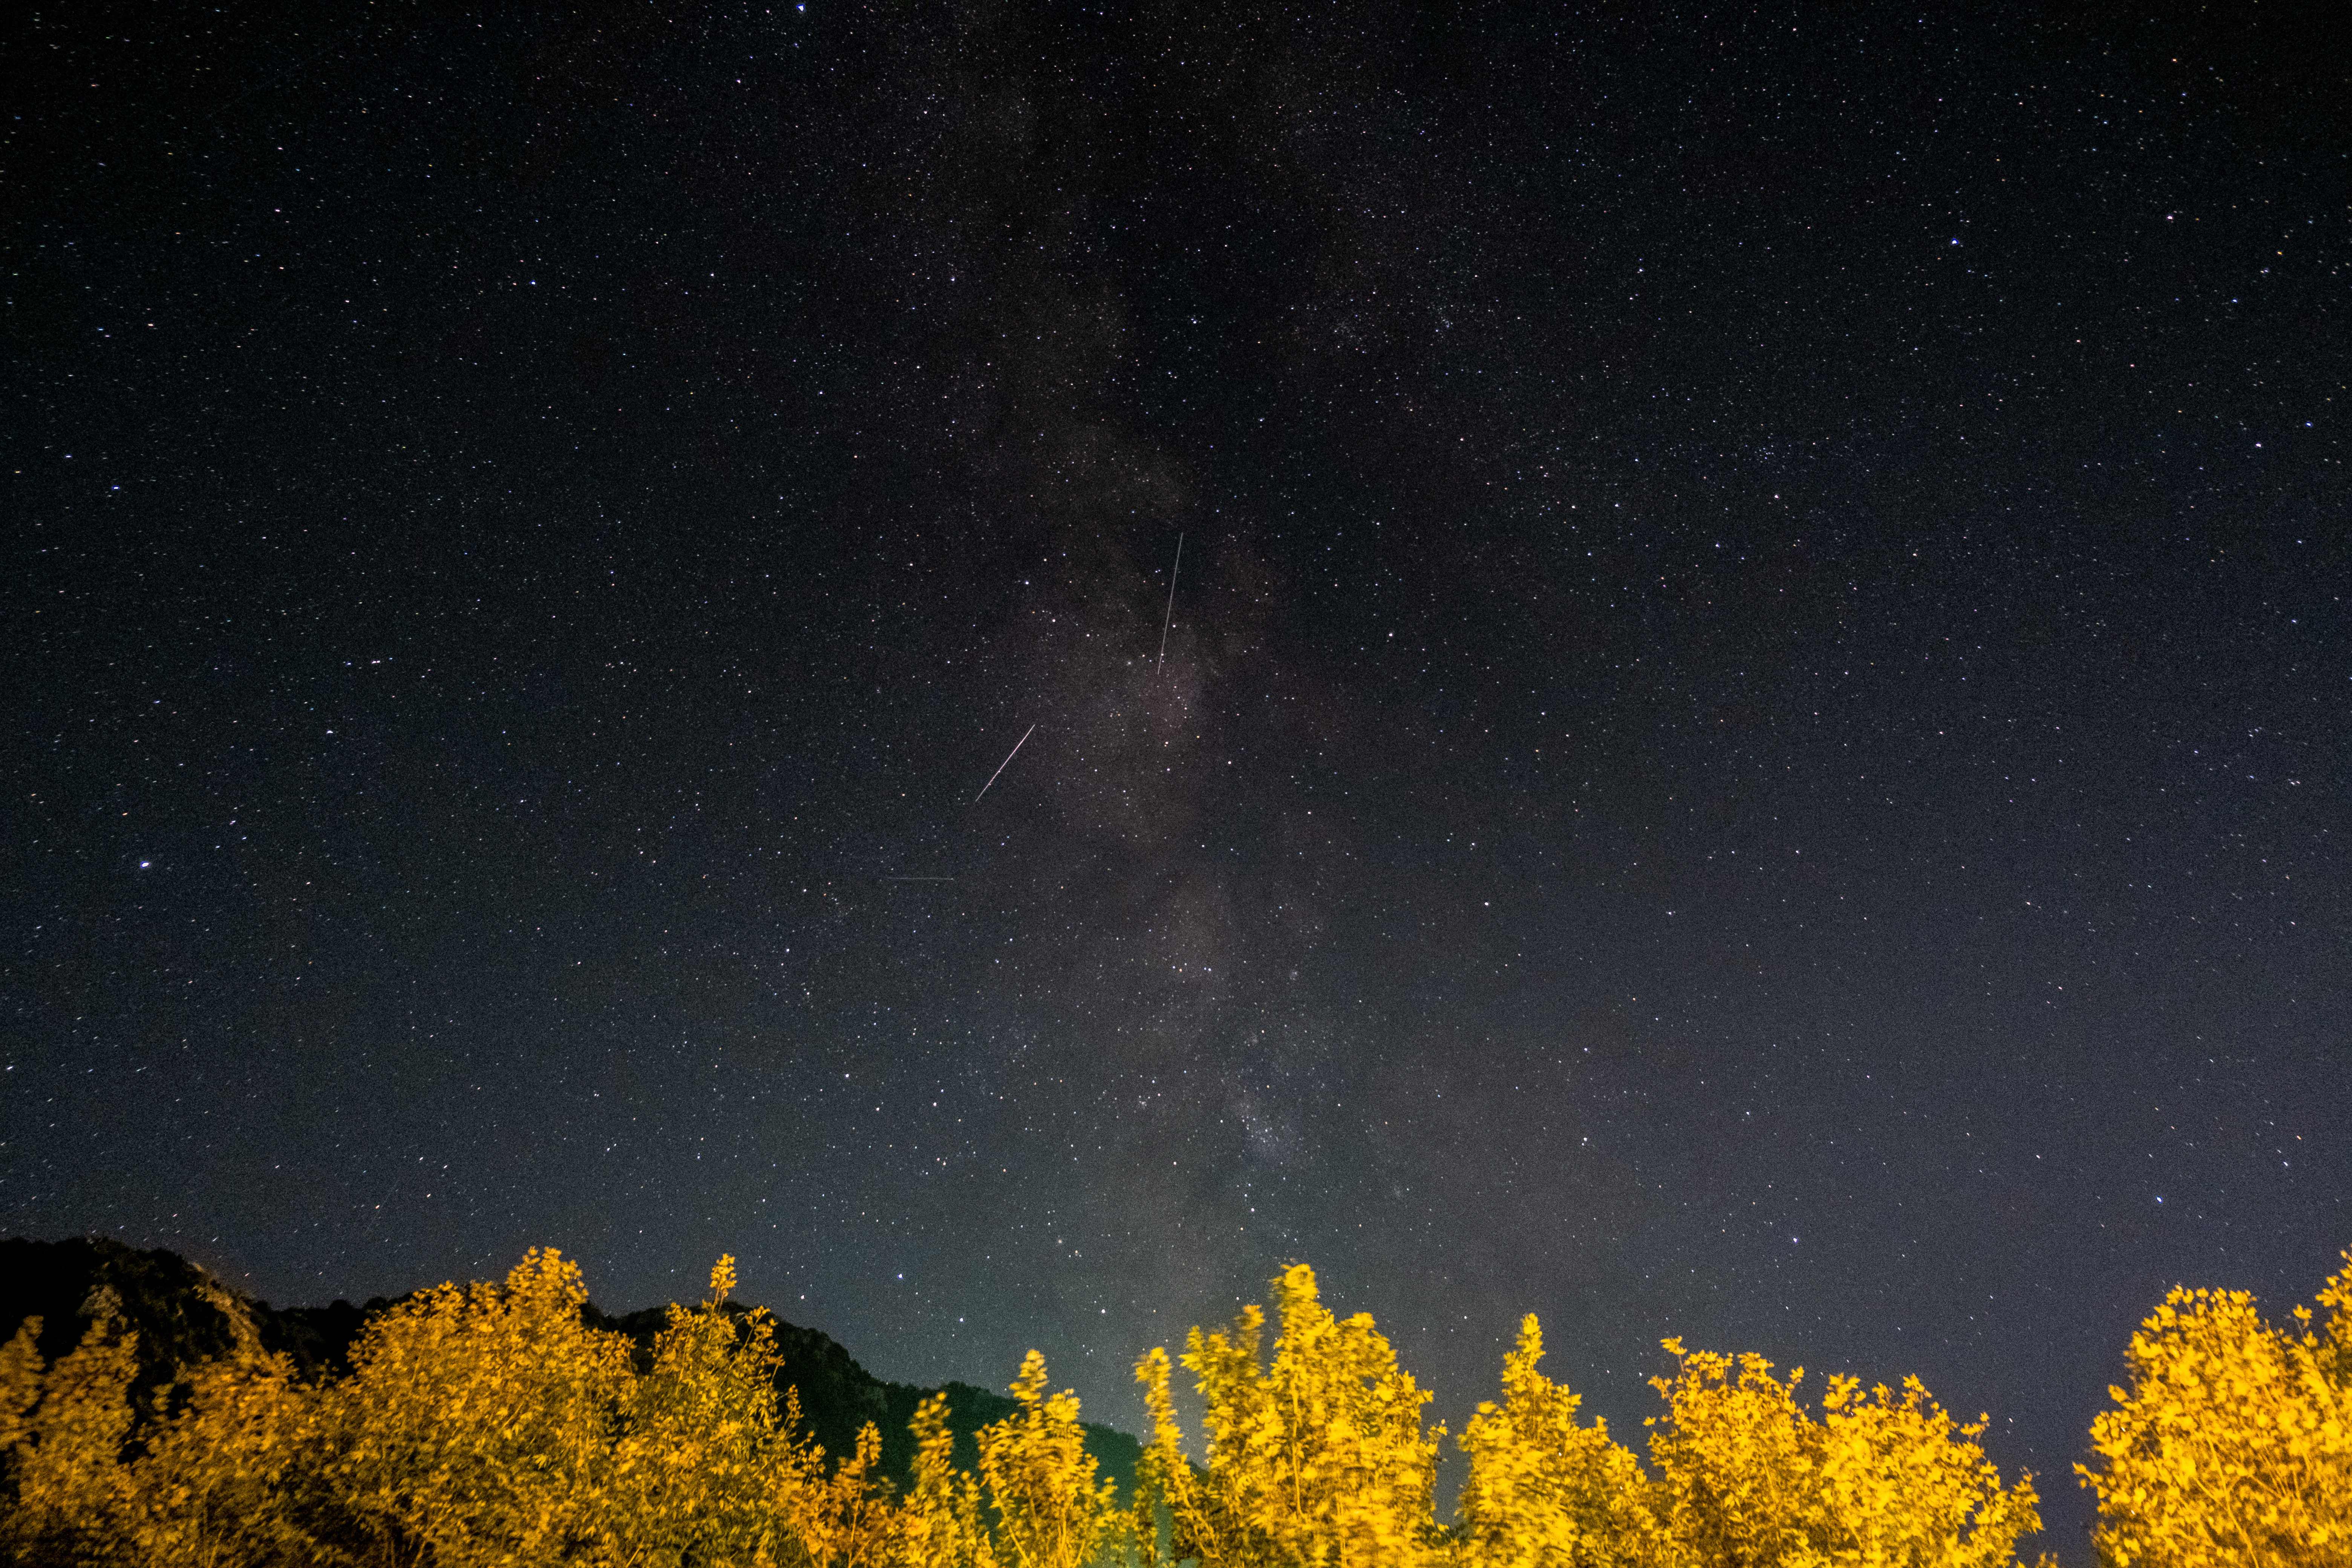 Photograph of the Orionid meteor shower in the night sky over Tannourine in northern Lebanon on October 3, 2021.